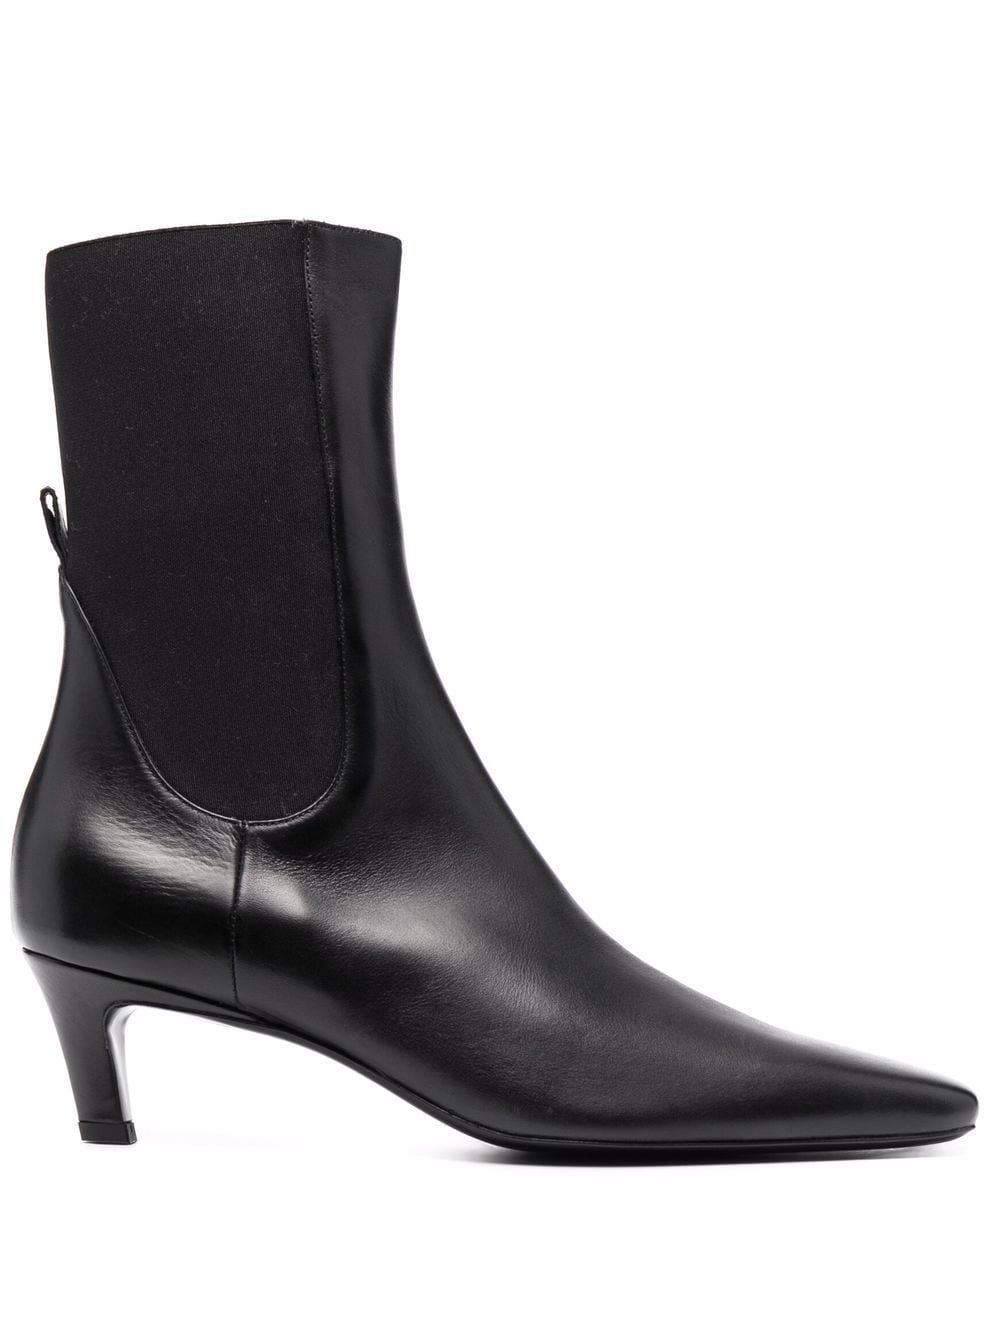 TOTEME The Mid Heel Ankle Boots - Farfetch | Farfetch Global